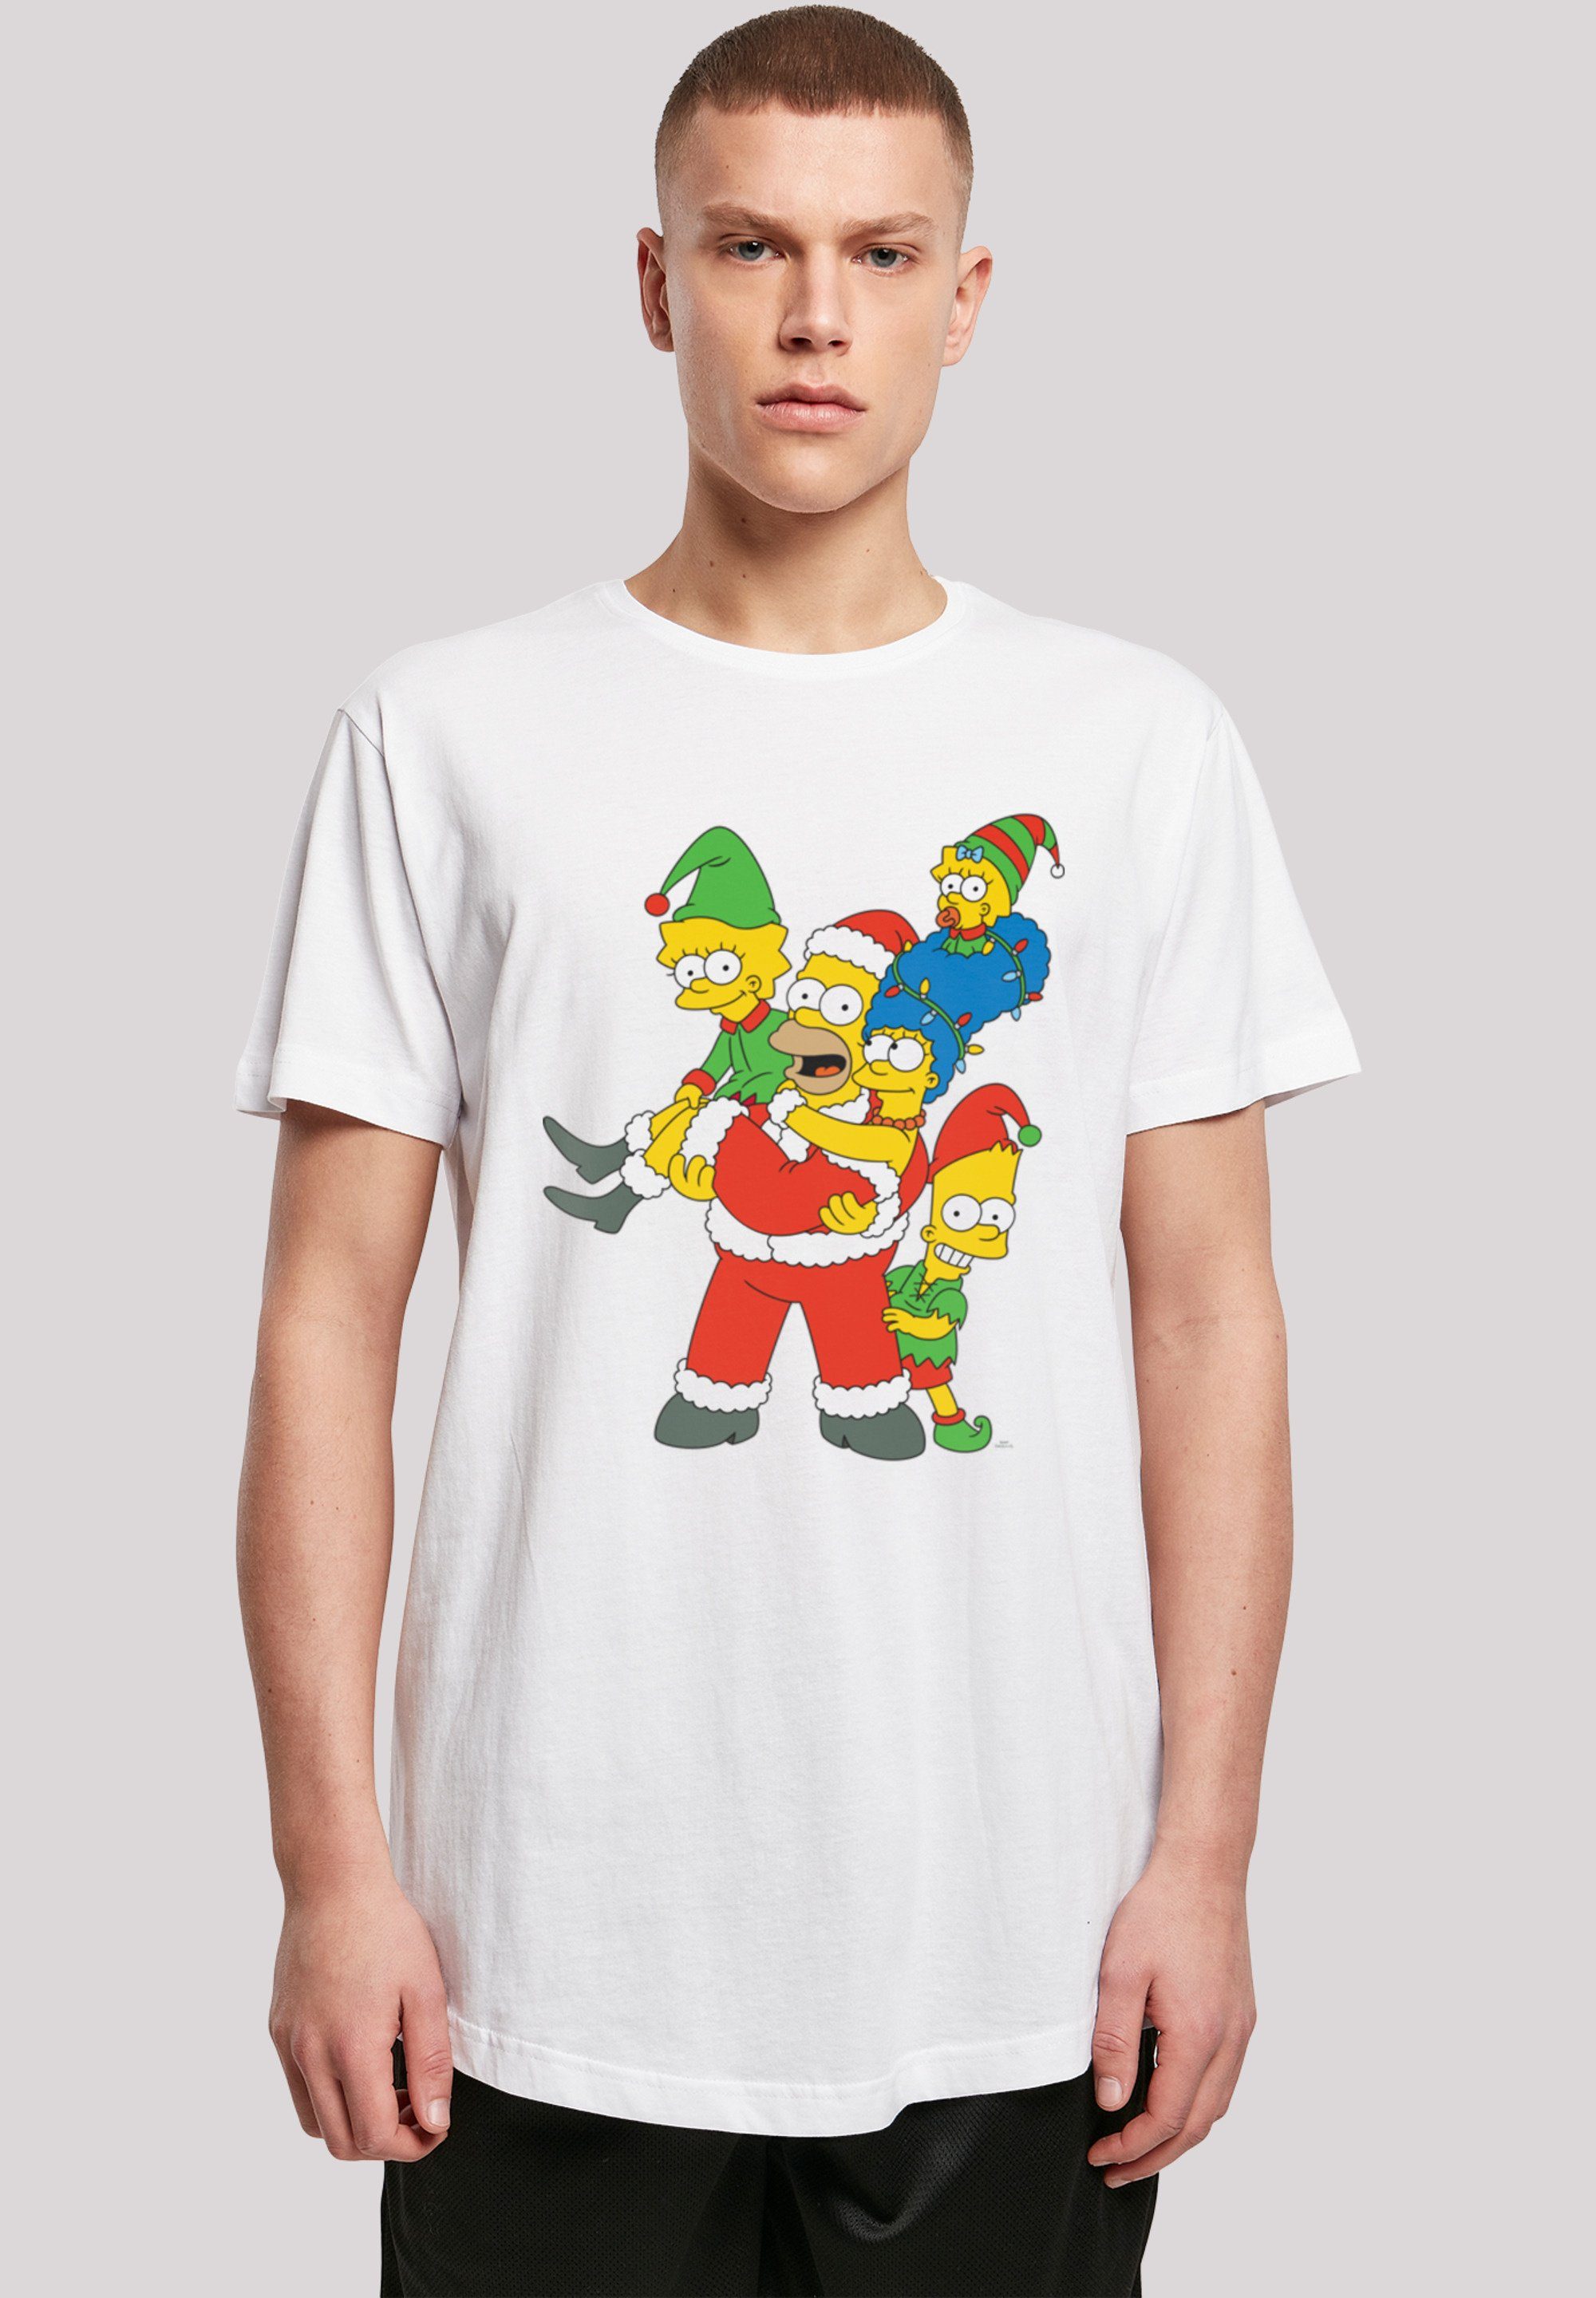 The Christmas Print Simpsons Weihnachten weiß T-Shirt F4NT4STIC Family